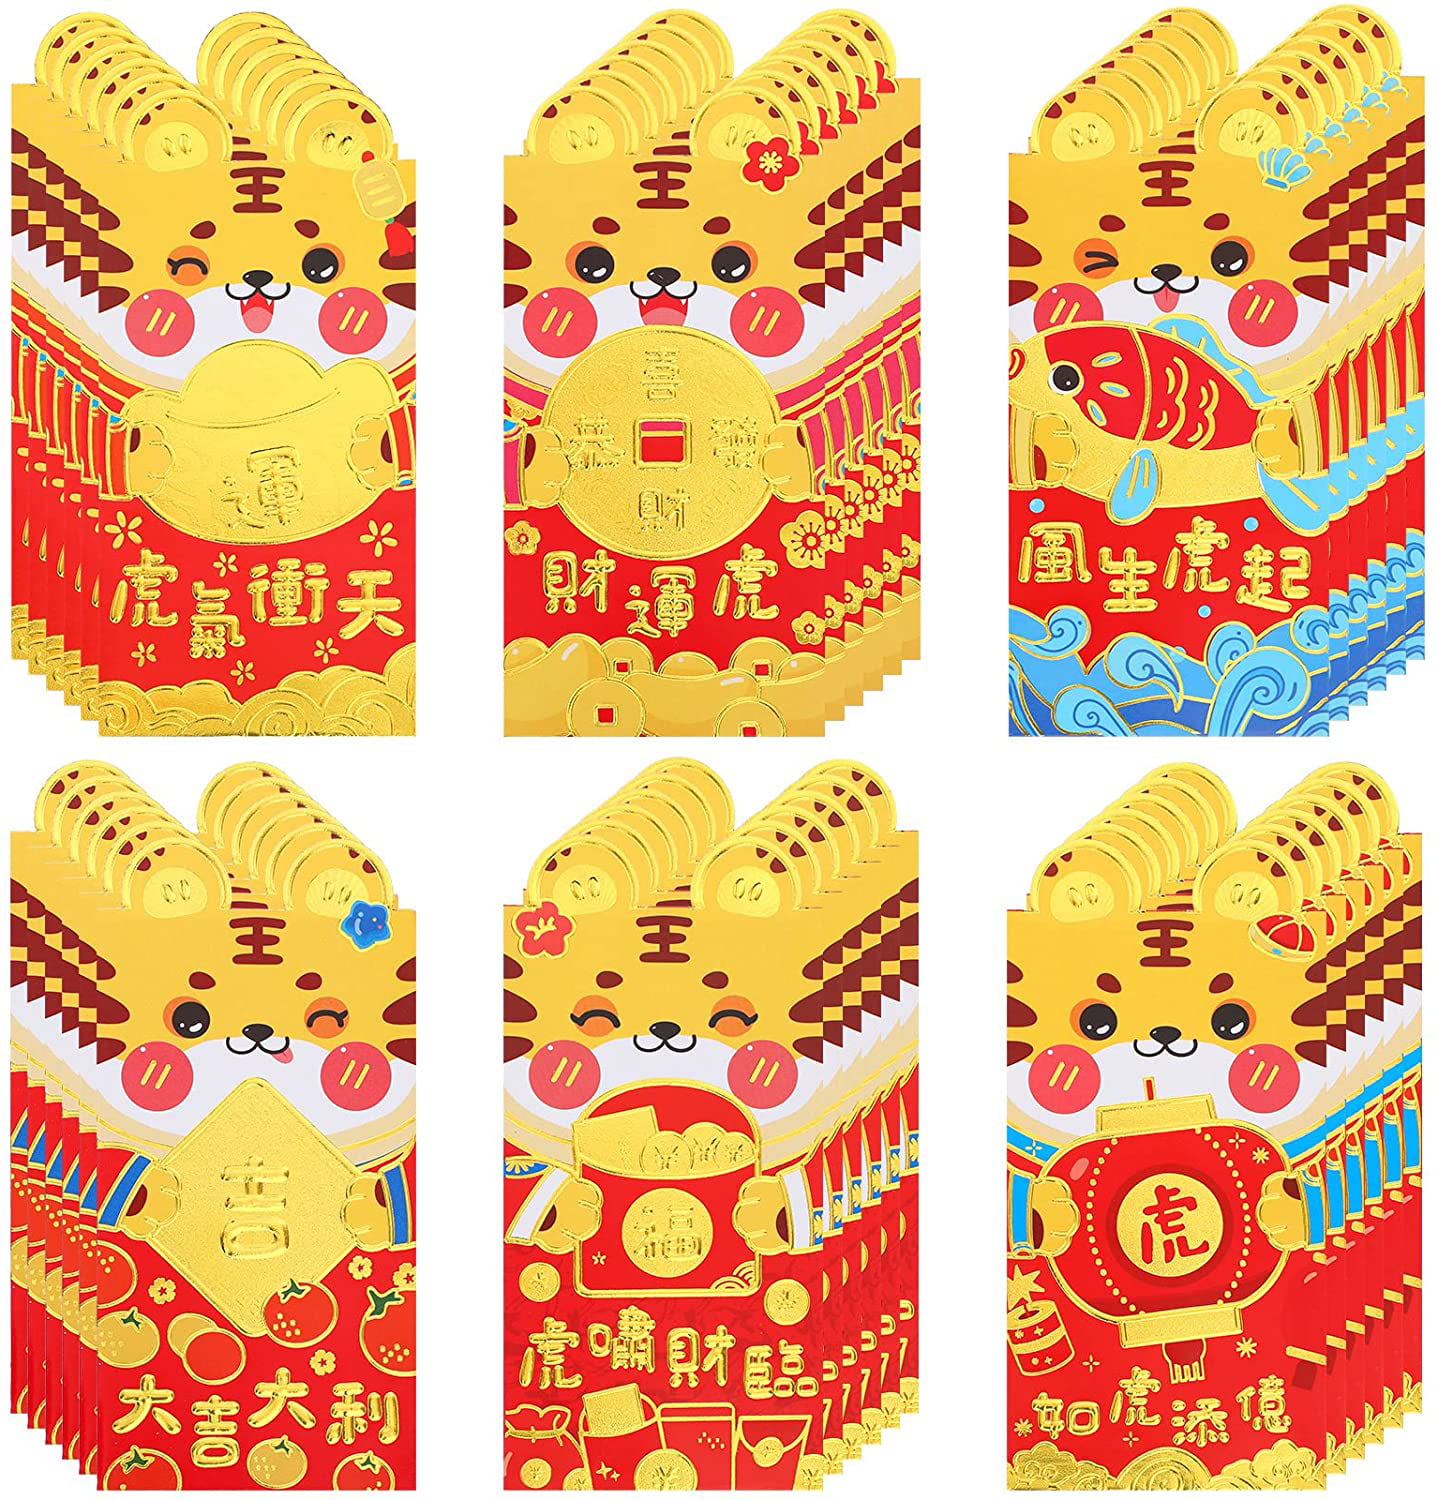 SINGOMON 36PCS Tiger Red Envelopes Chinese Red Envelopes 2022 Chinese New Year Red Bags Lucky Money Pockets Red Pockets Hong Bao with Cute Tiger and Blessing Words for 2022 Chinese New Year Spring Festival Birthday Wedding Baby Shower Party